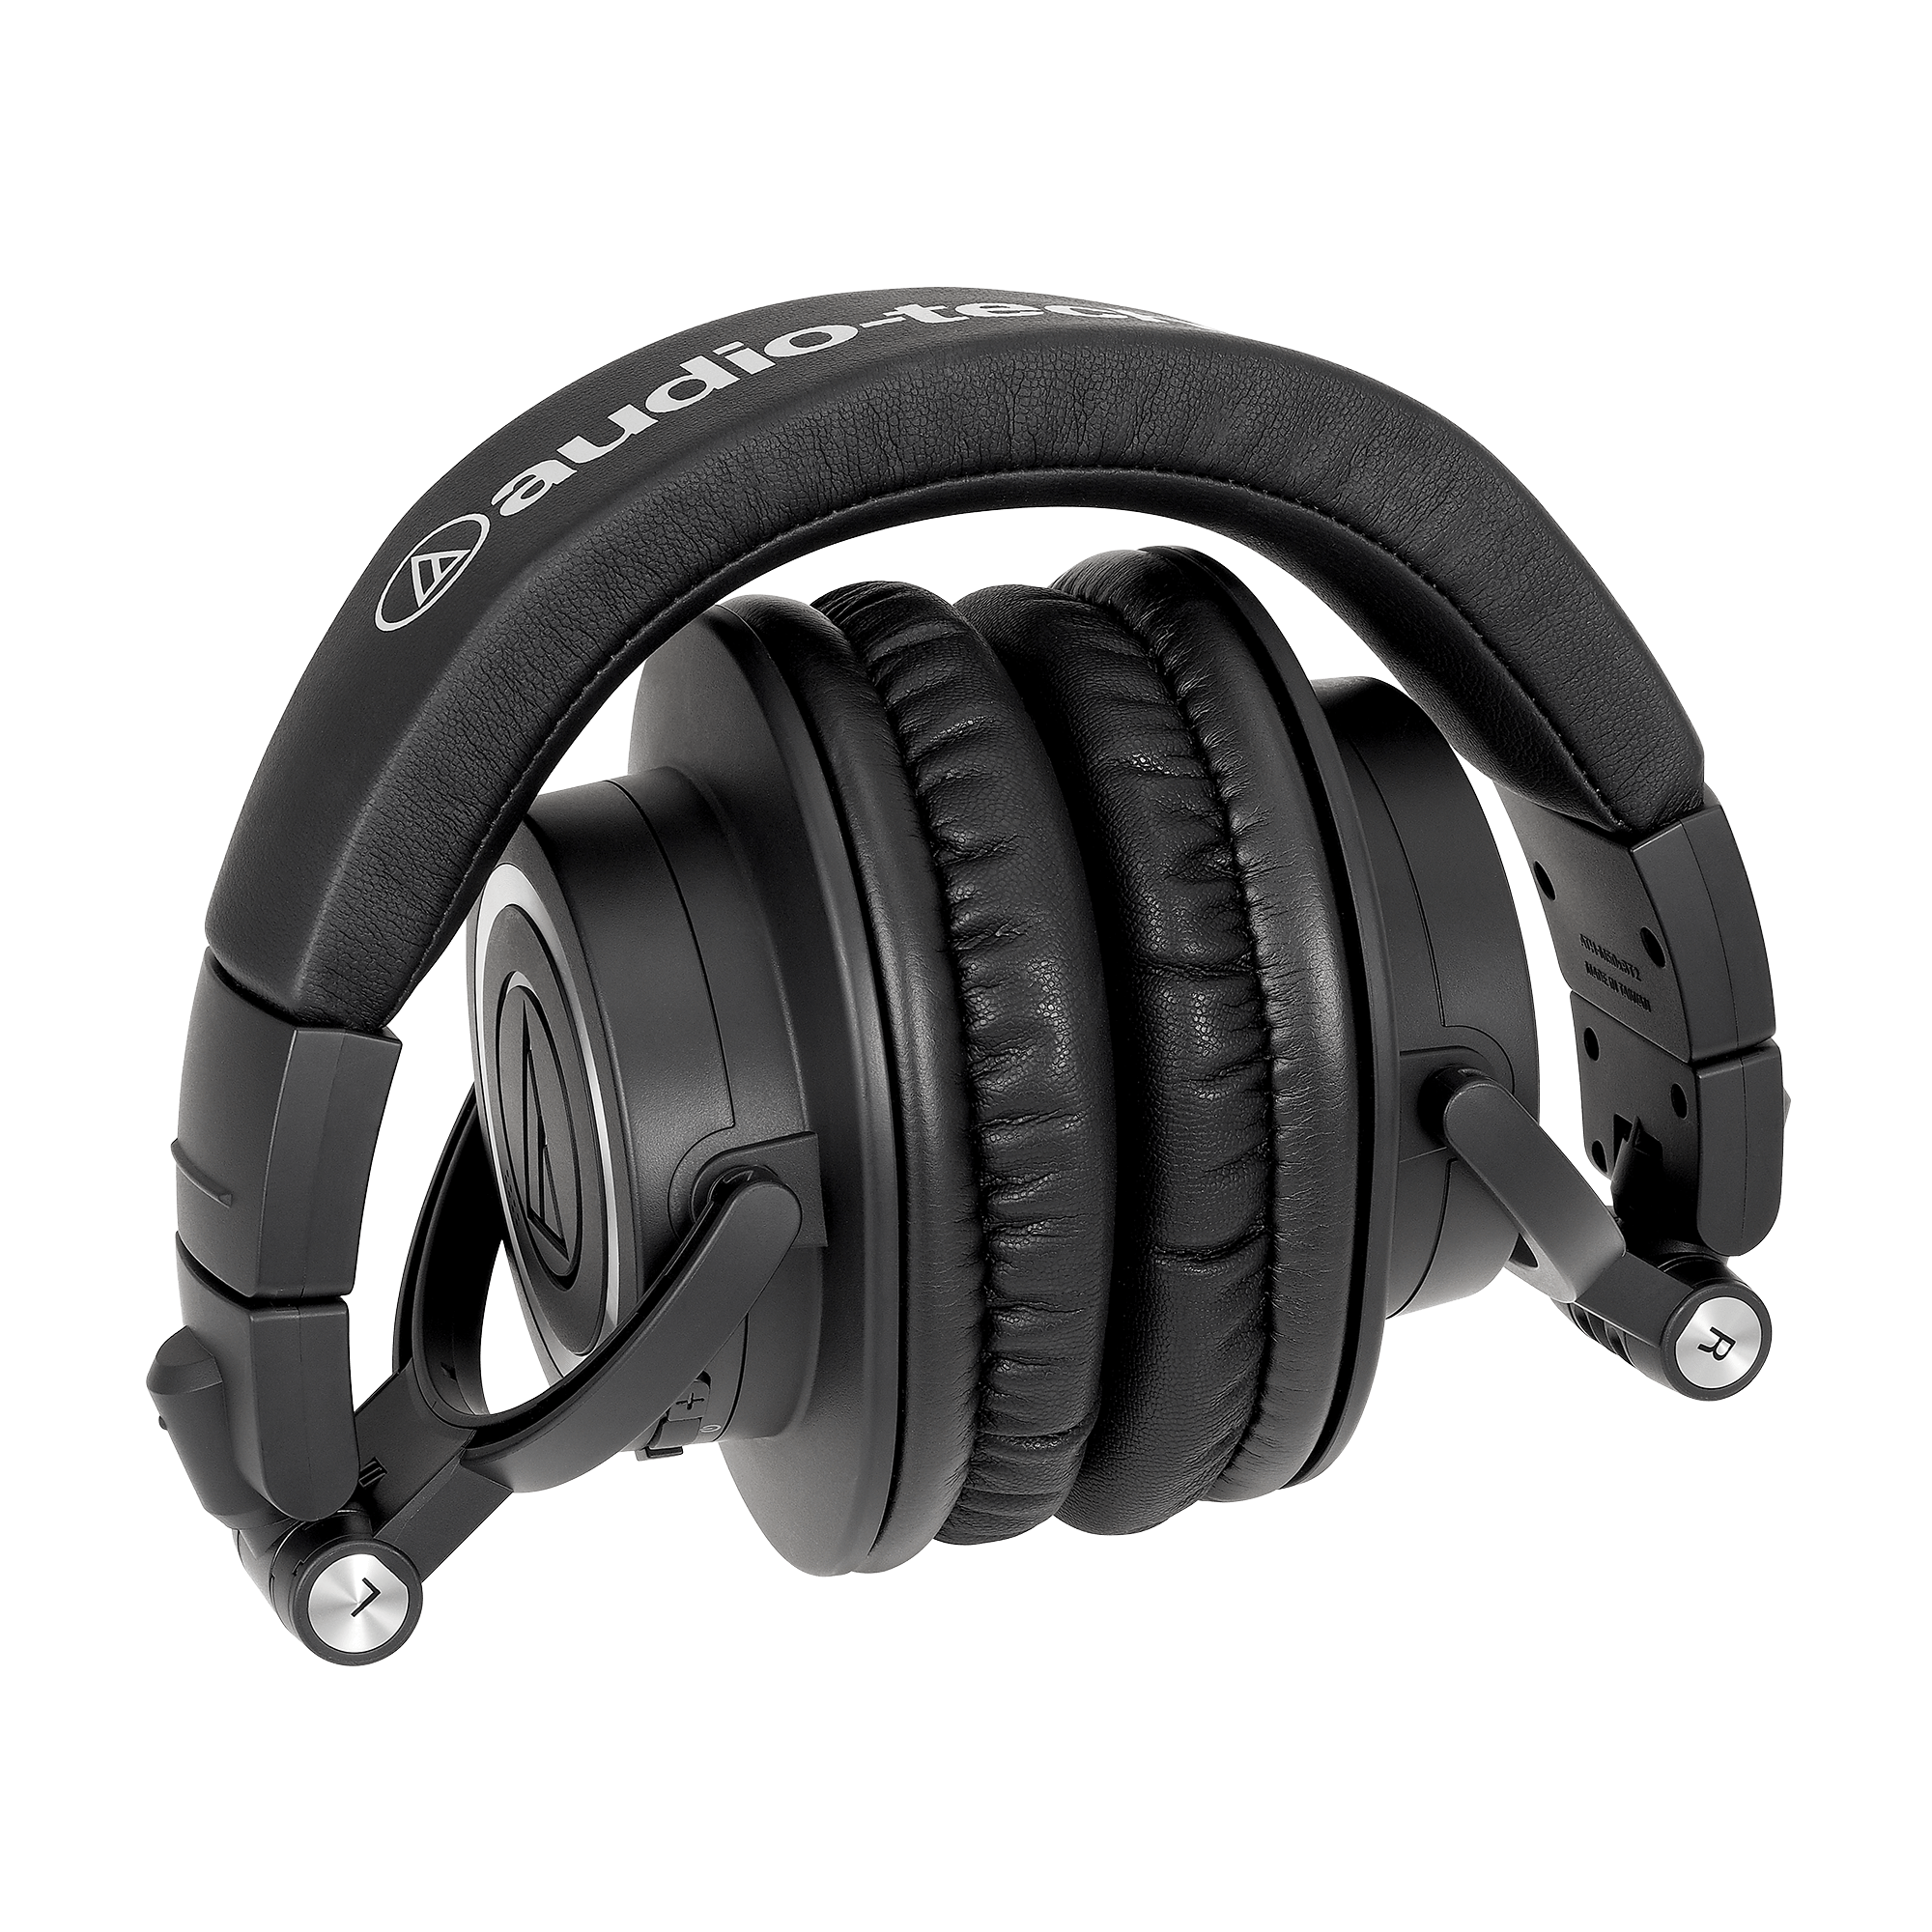 ATH-M50x 90° Swiveling Earcups and Foldable Design